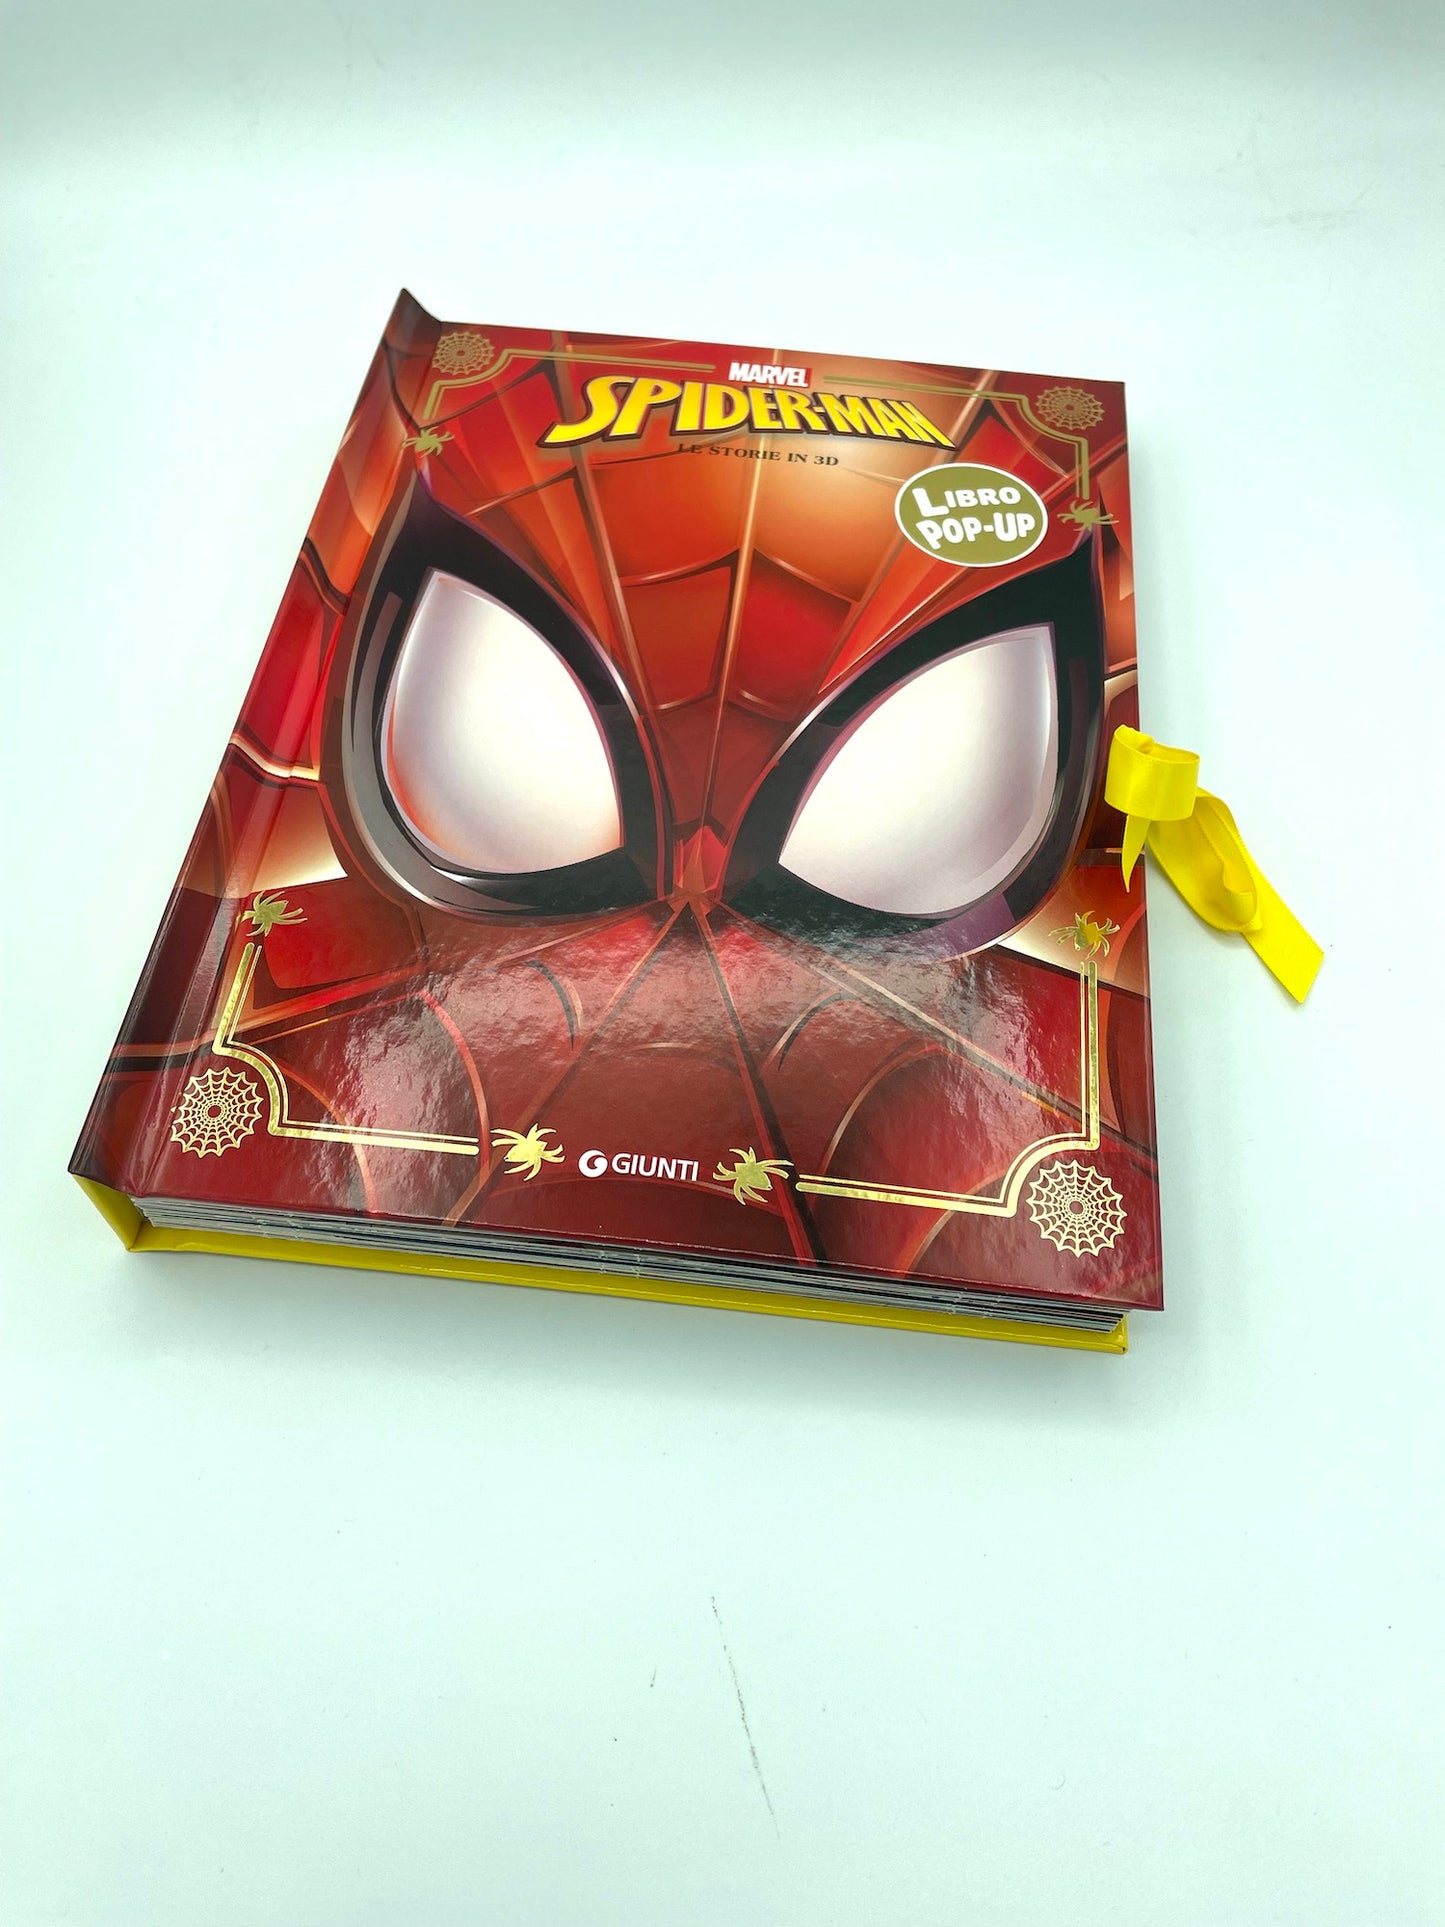 Libro Pop-up Spider-man::Le storie in 3d